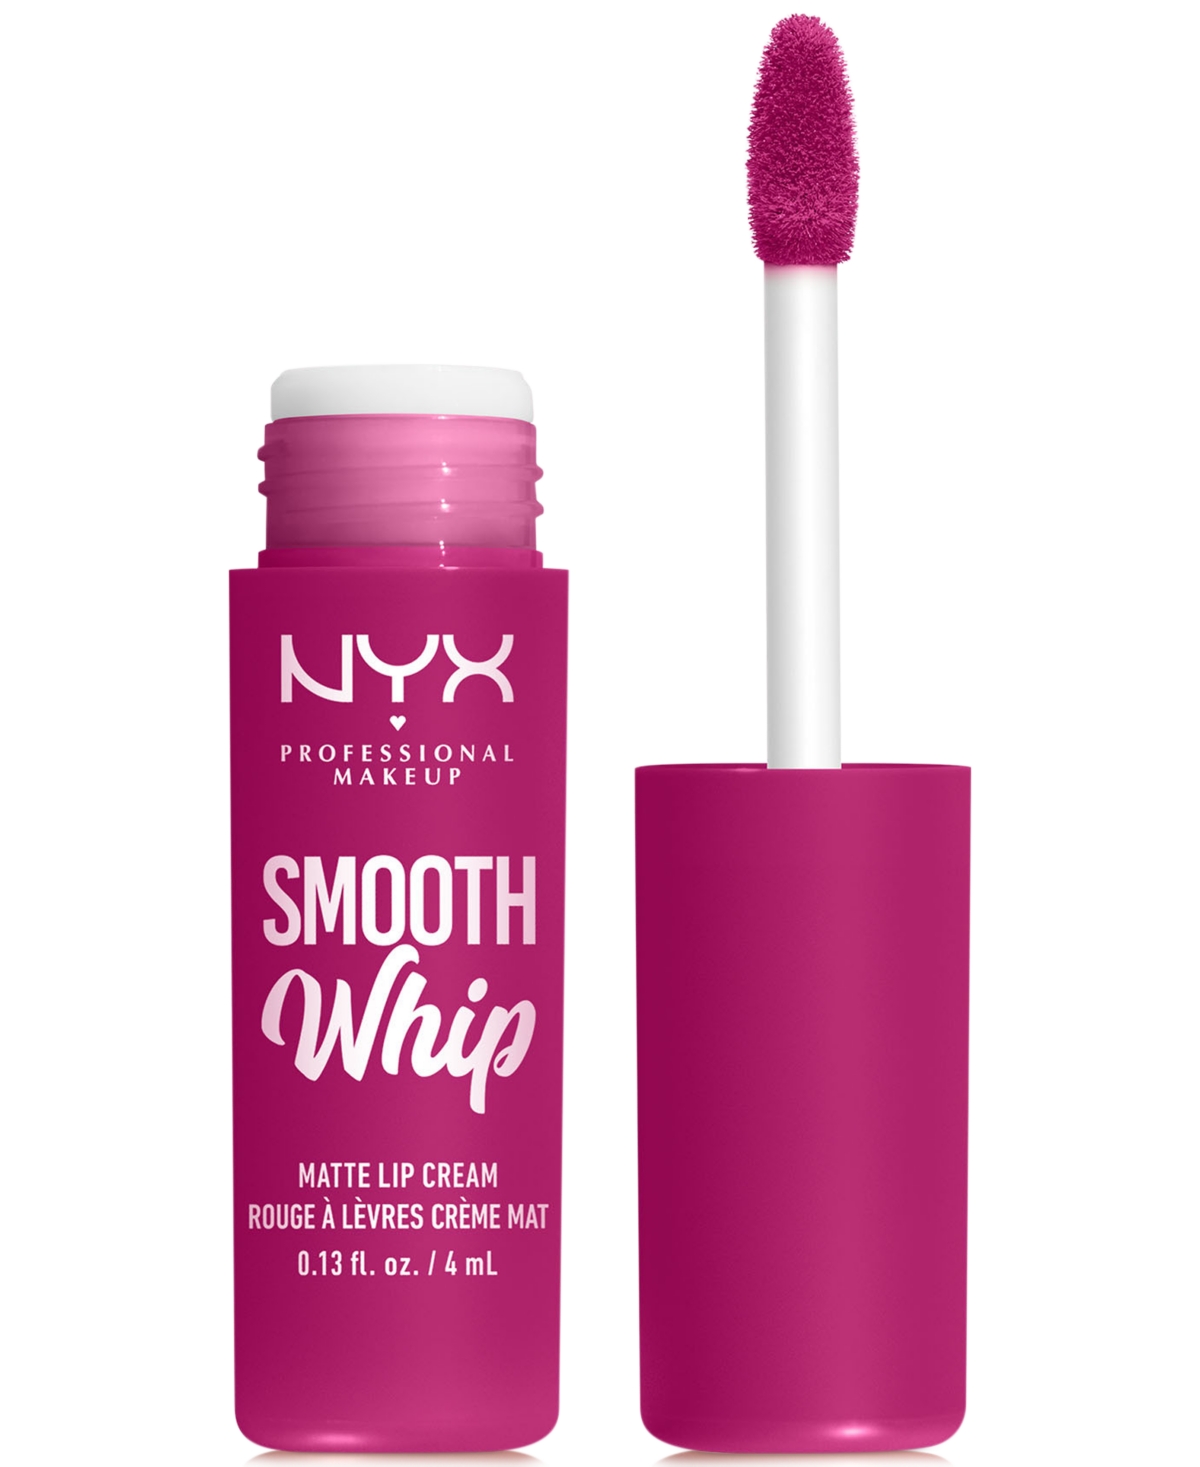 Nyx Professional Makeup Smooth Whip Matte Lip Cream In Bday Frosting